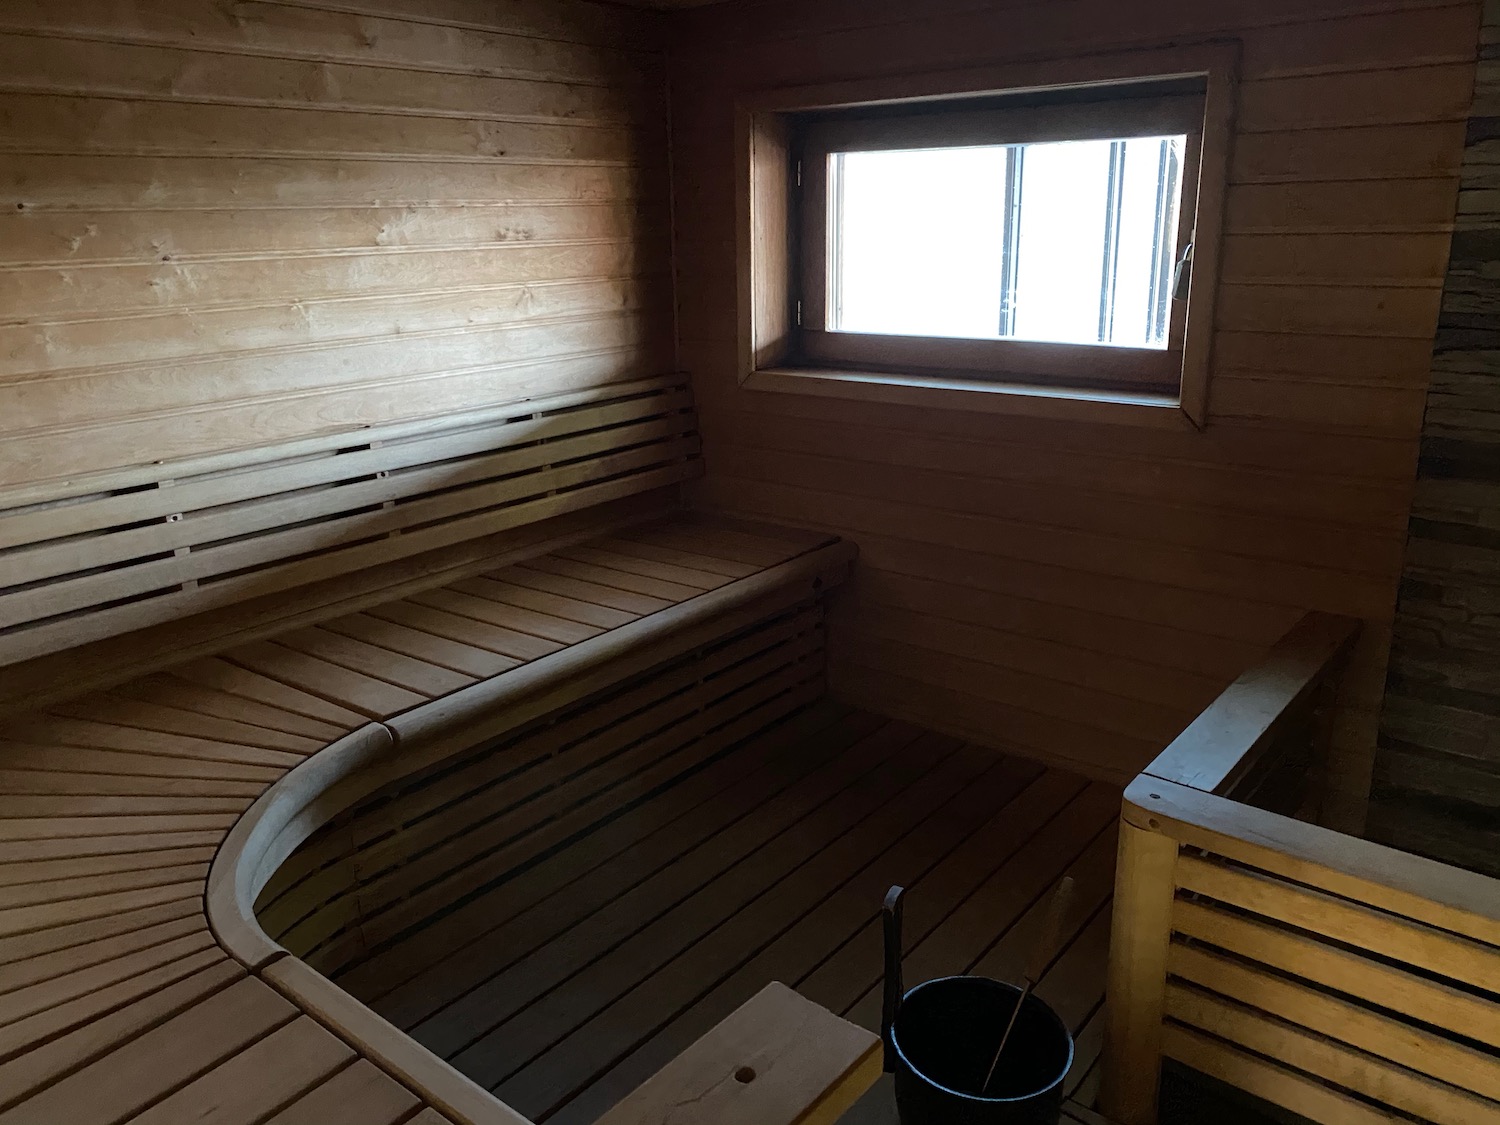 a wooden sauna with a bucket and a window